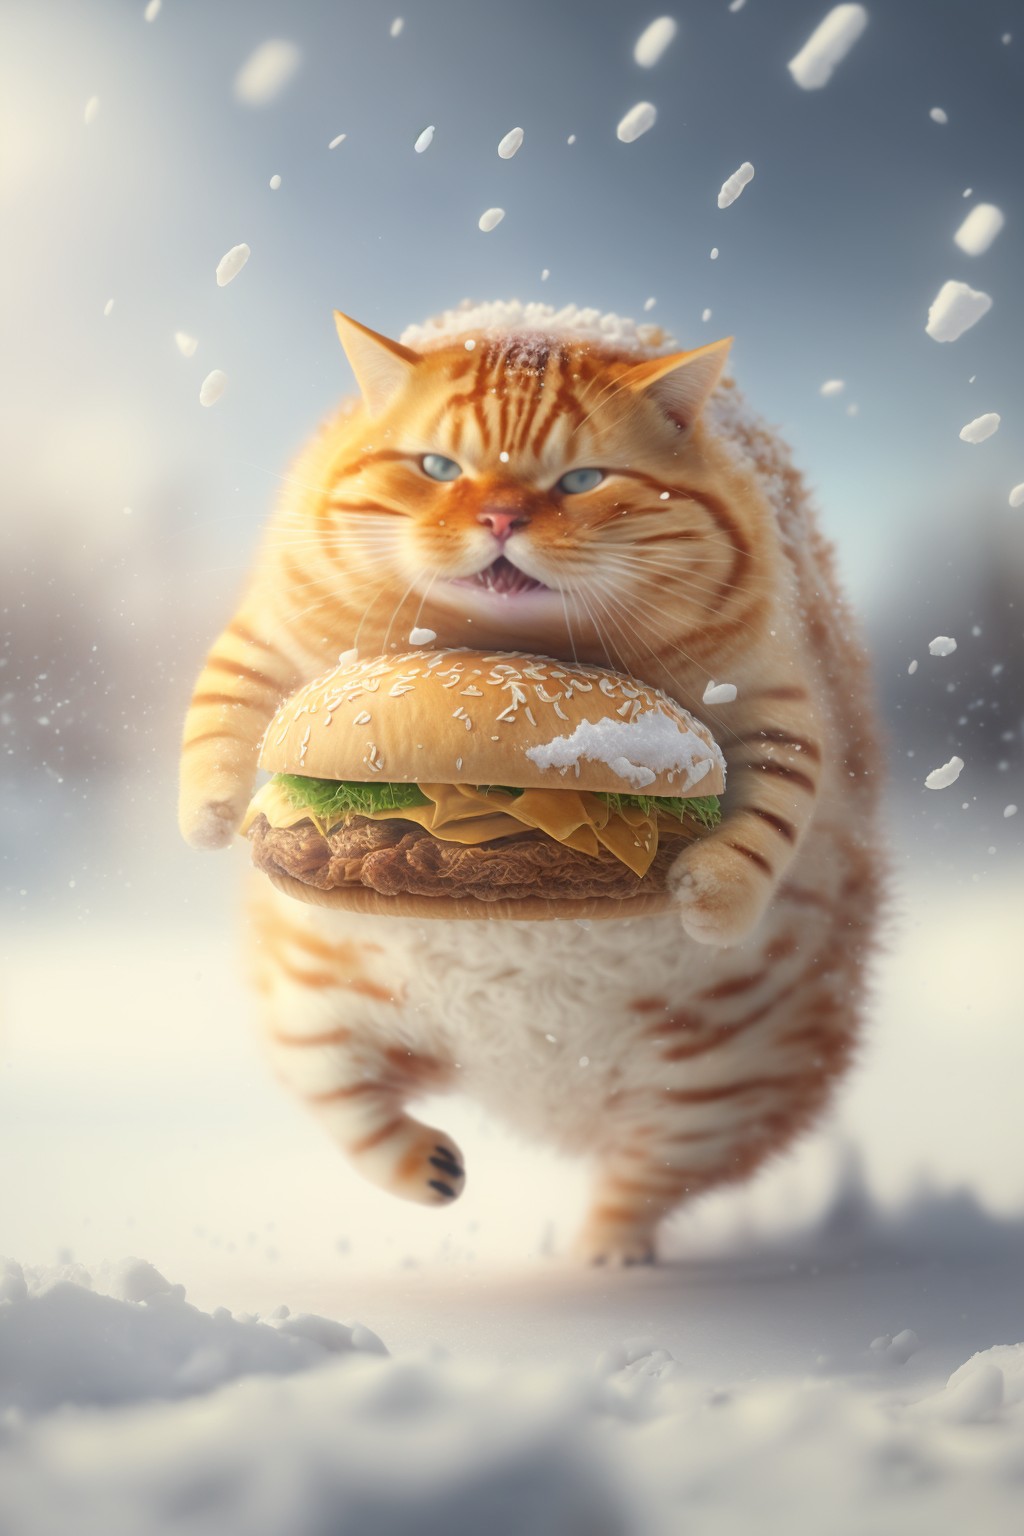 Fat cat running in the snow holding a hamburger